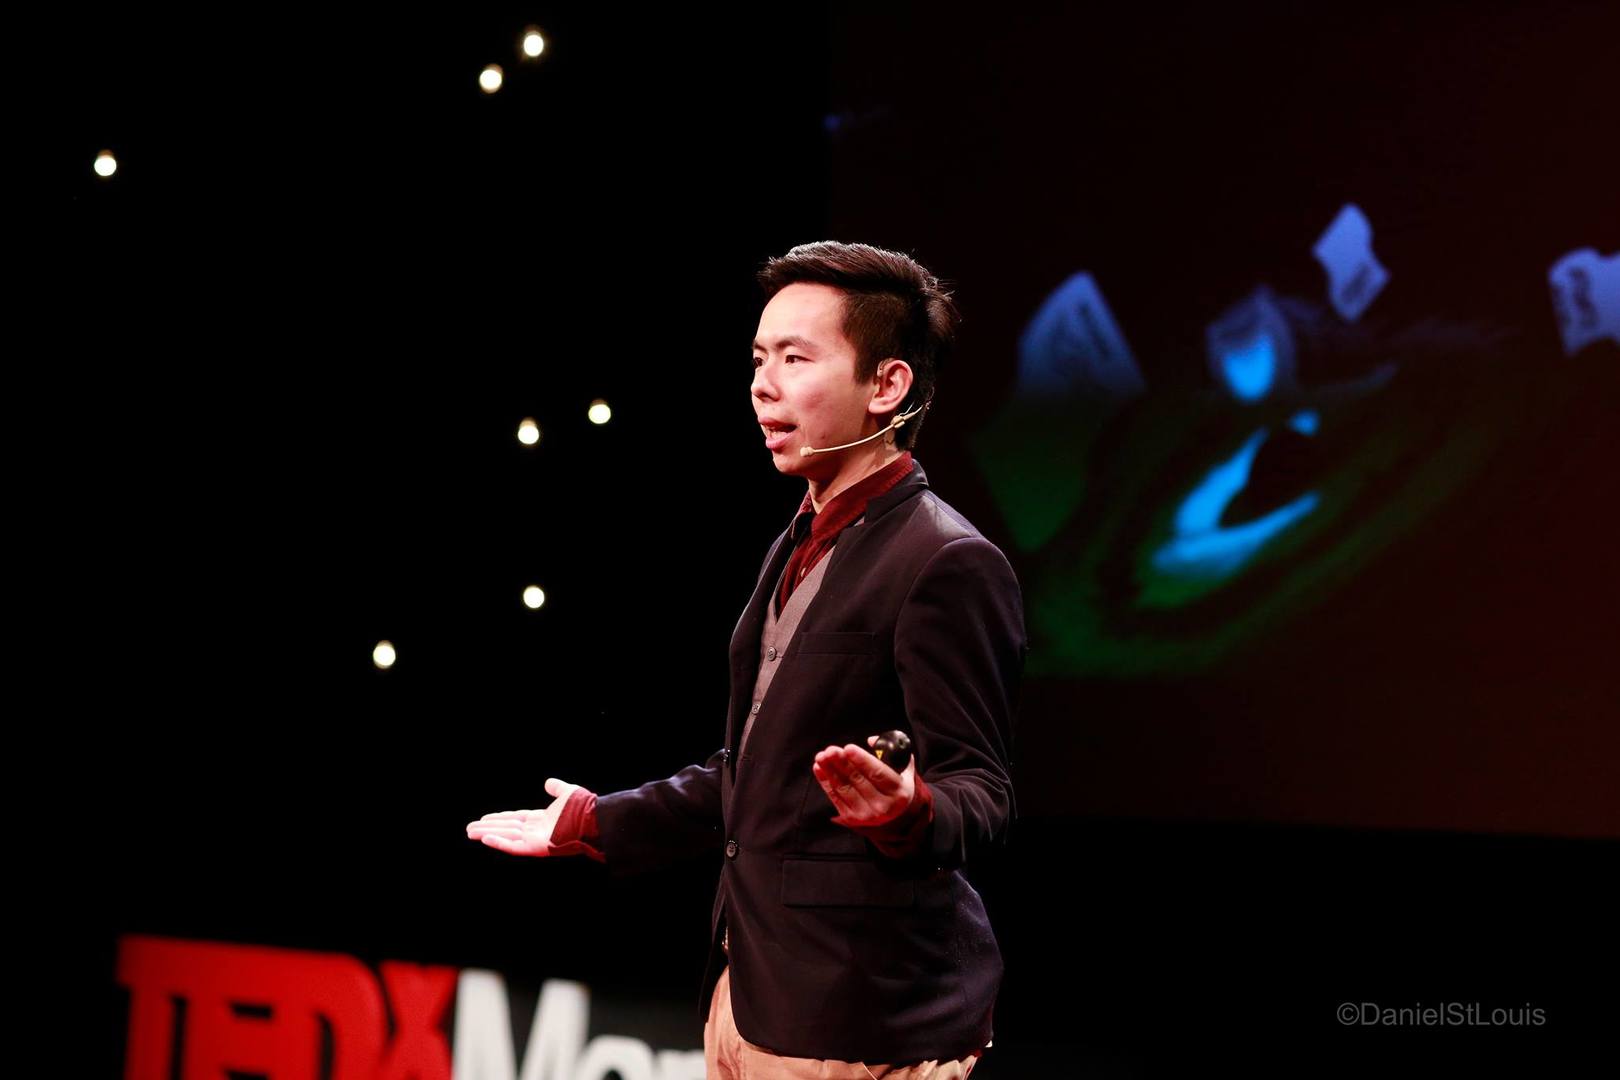 I was bullied for 10 years in high school, but i stepped out to interview over 700 strangers & speak at tedx | weirdkaya